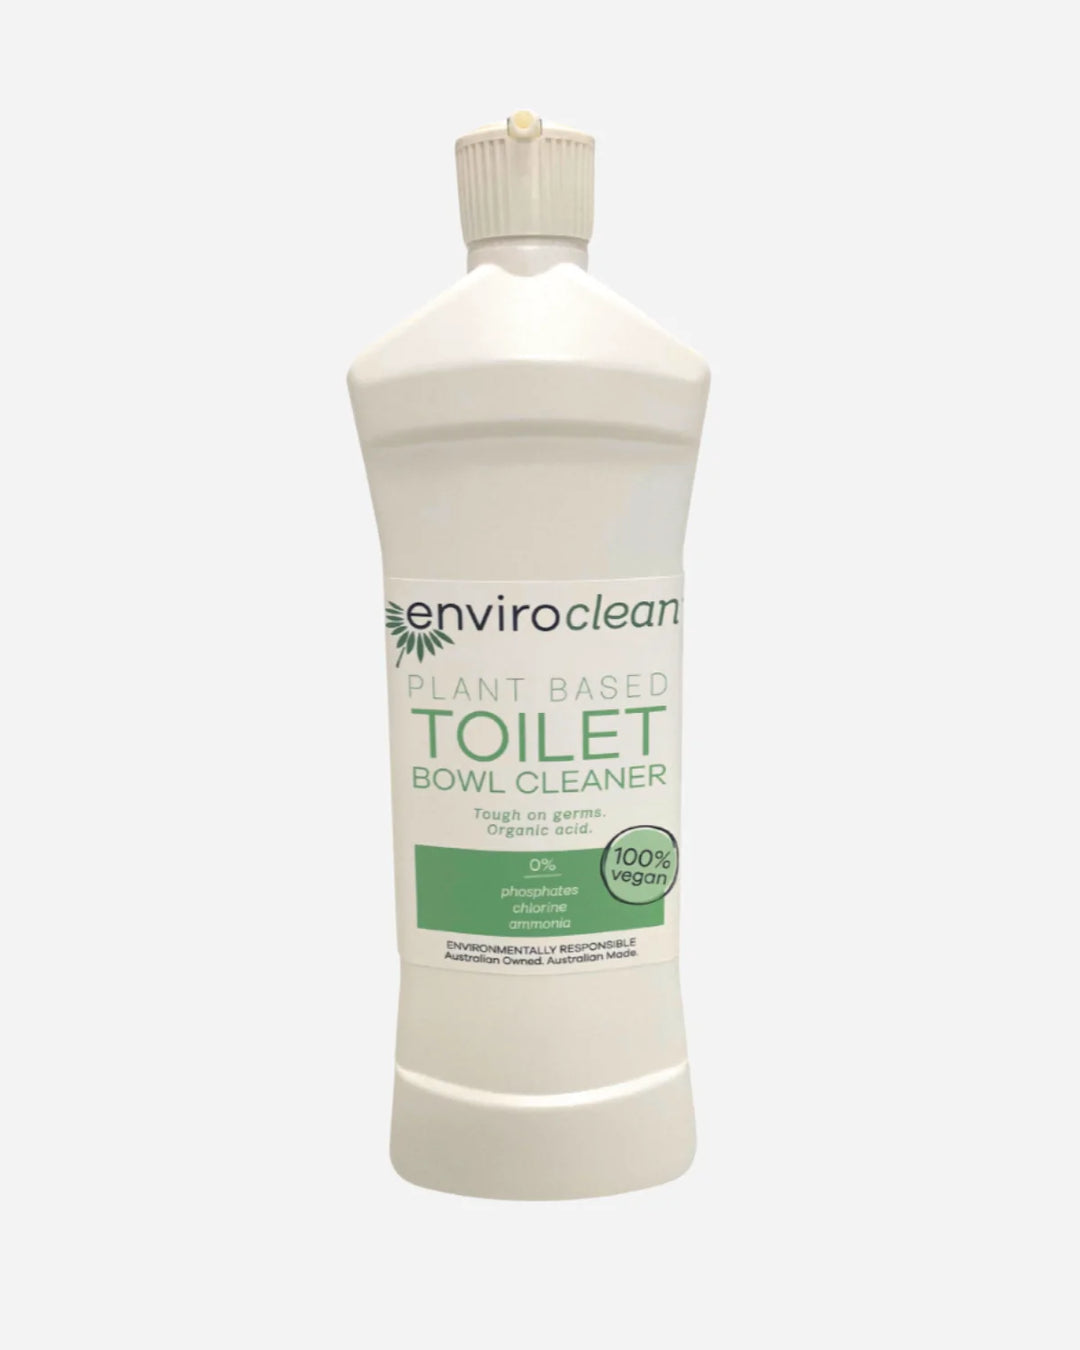 Toilet Bowl Cleaner from Enviroclean